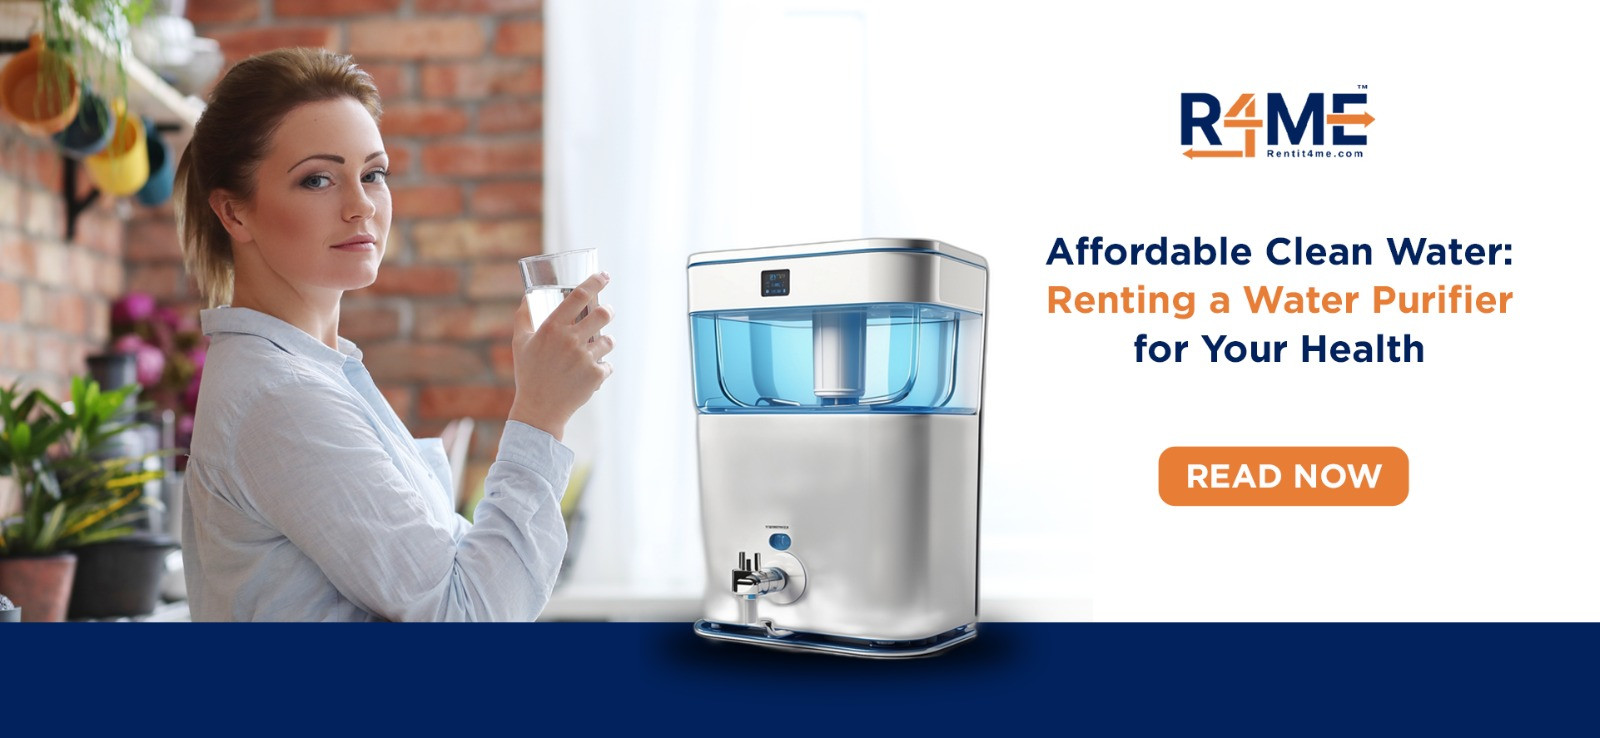 Affordable Clean Water: Renting a Water Purifier for Your Health